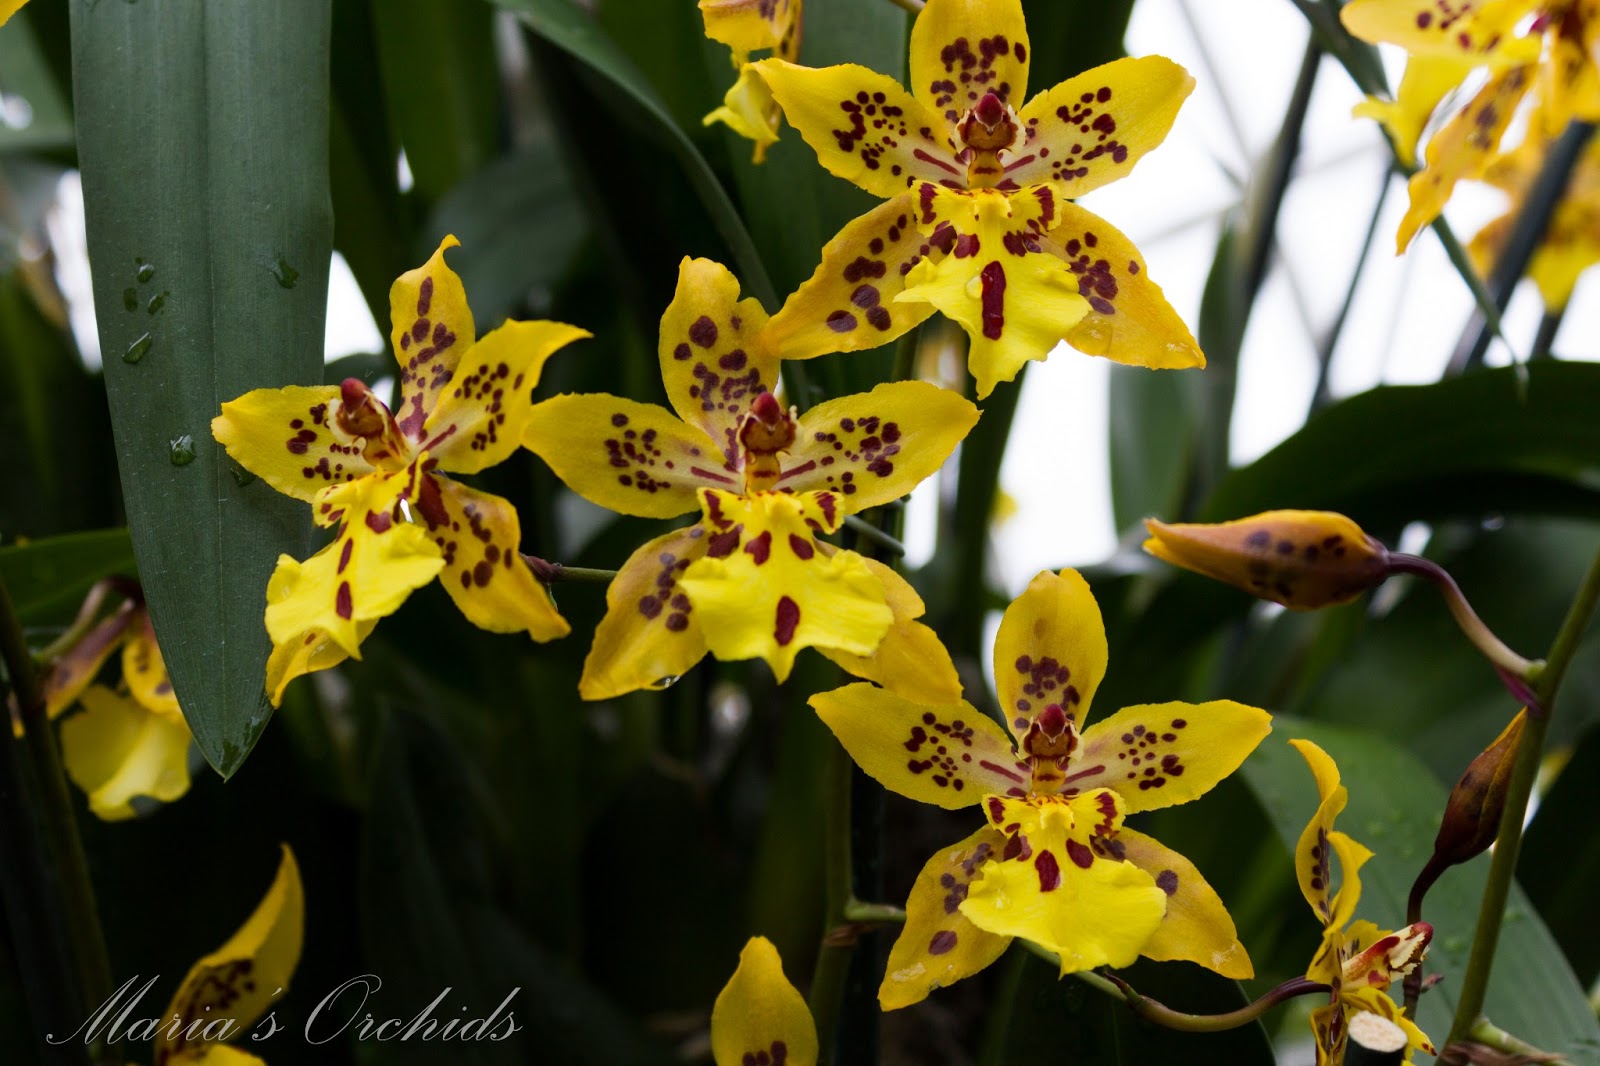 Maria's Orchids: New York Orchid Show 2013: Oncidiums1600 x 1066